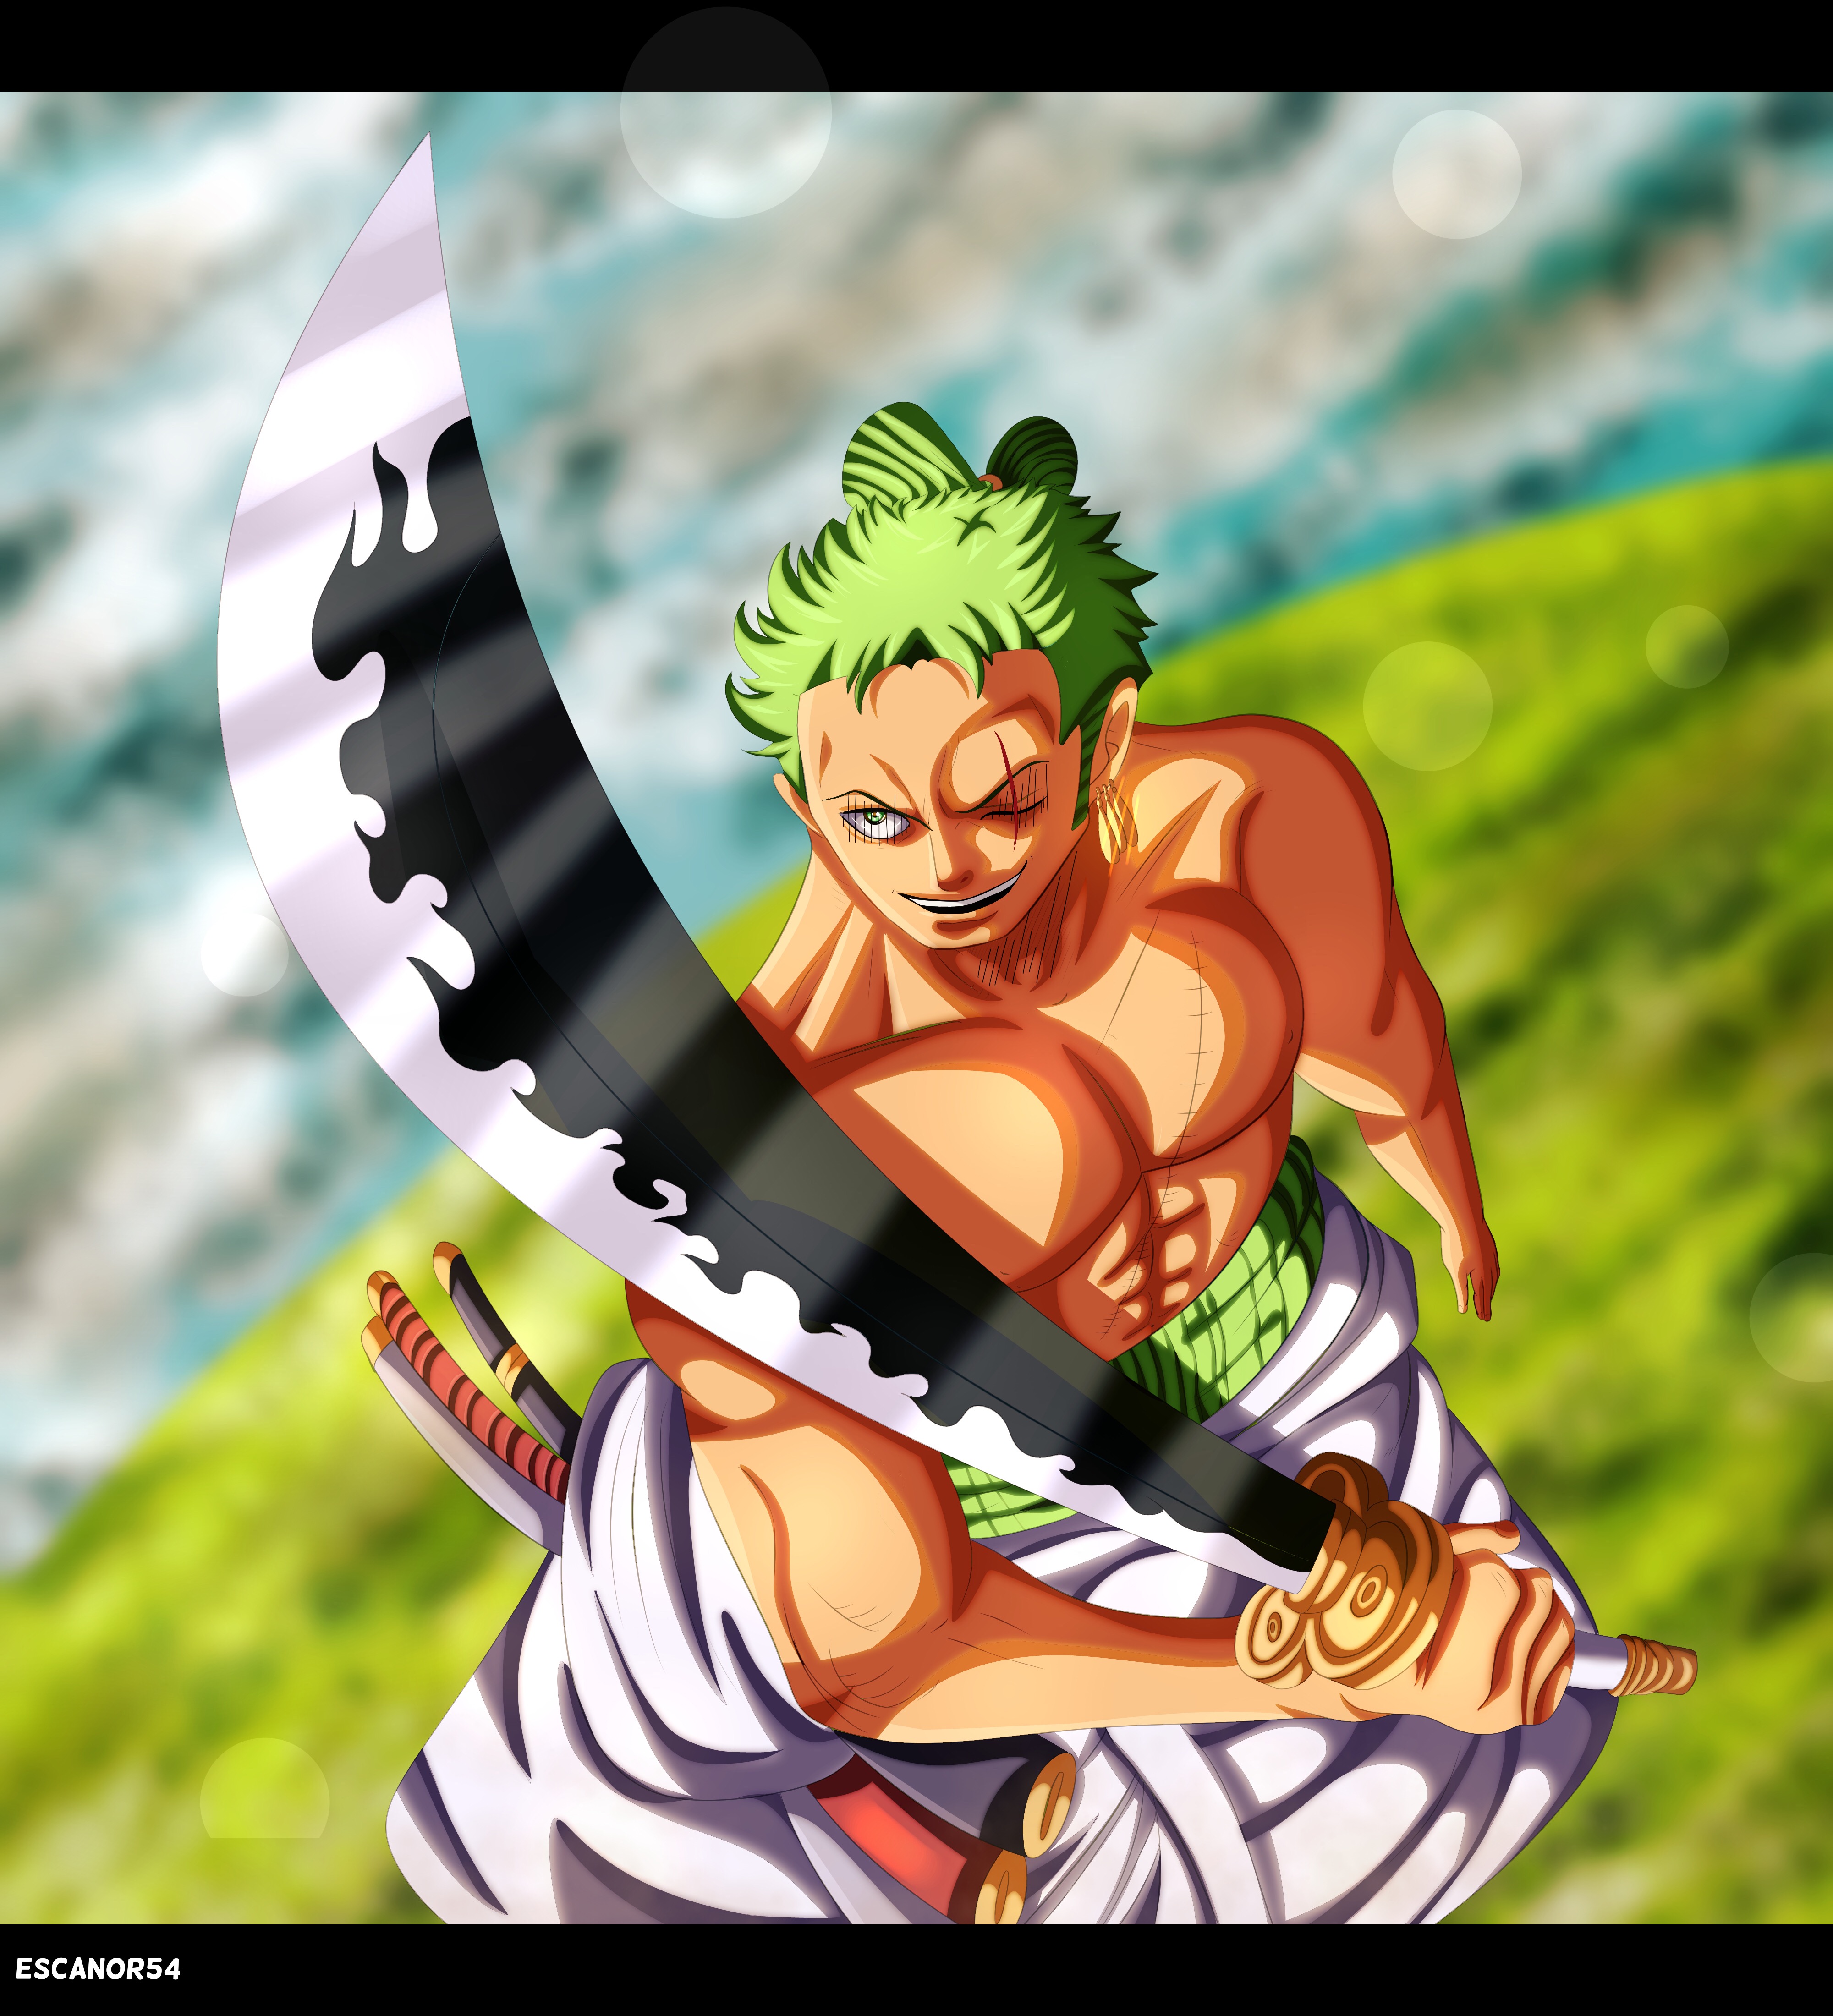 Zoro's Enma #fyp #anime #onepiece #onepieceanime #onepiecefan